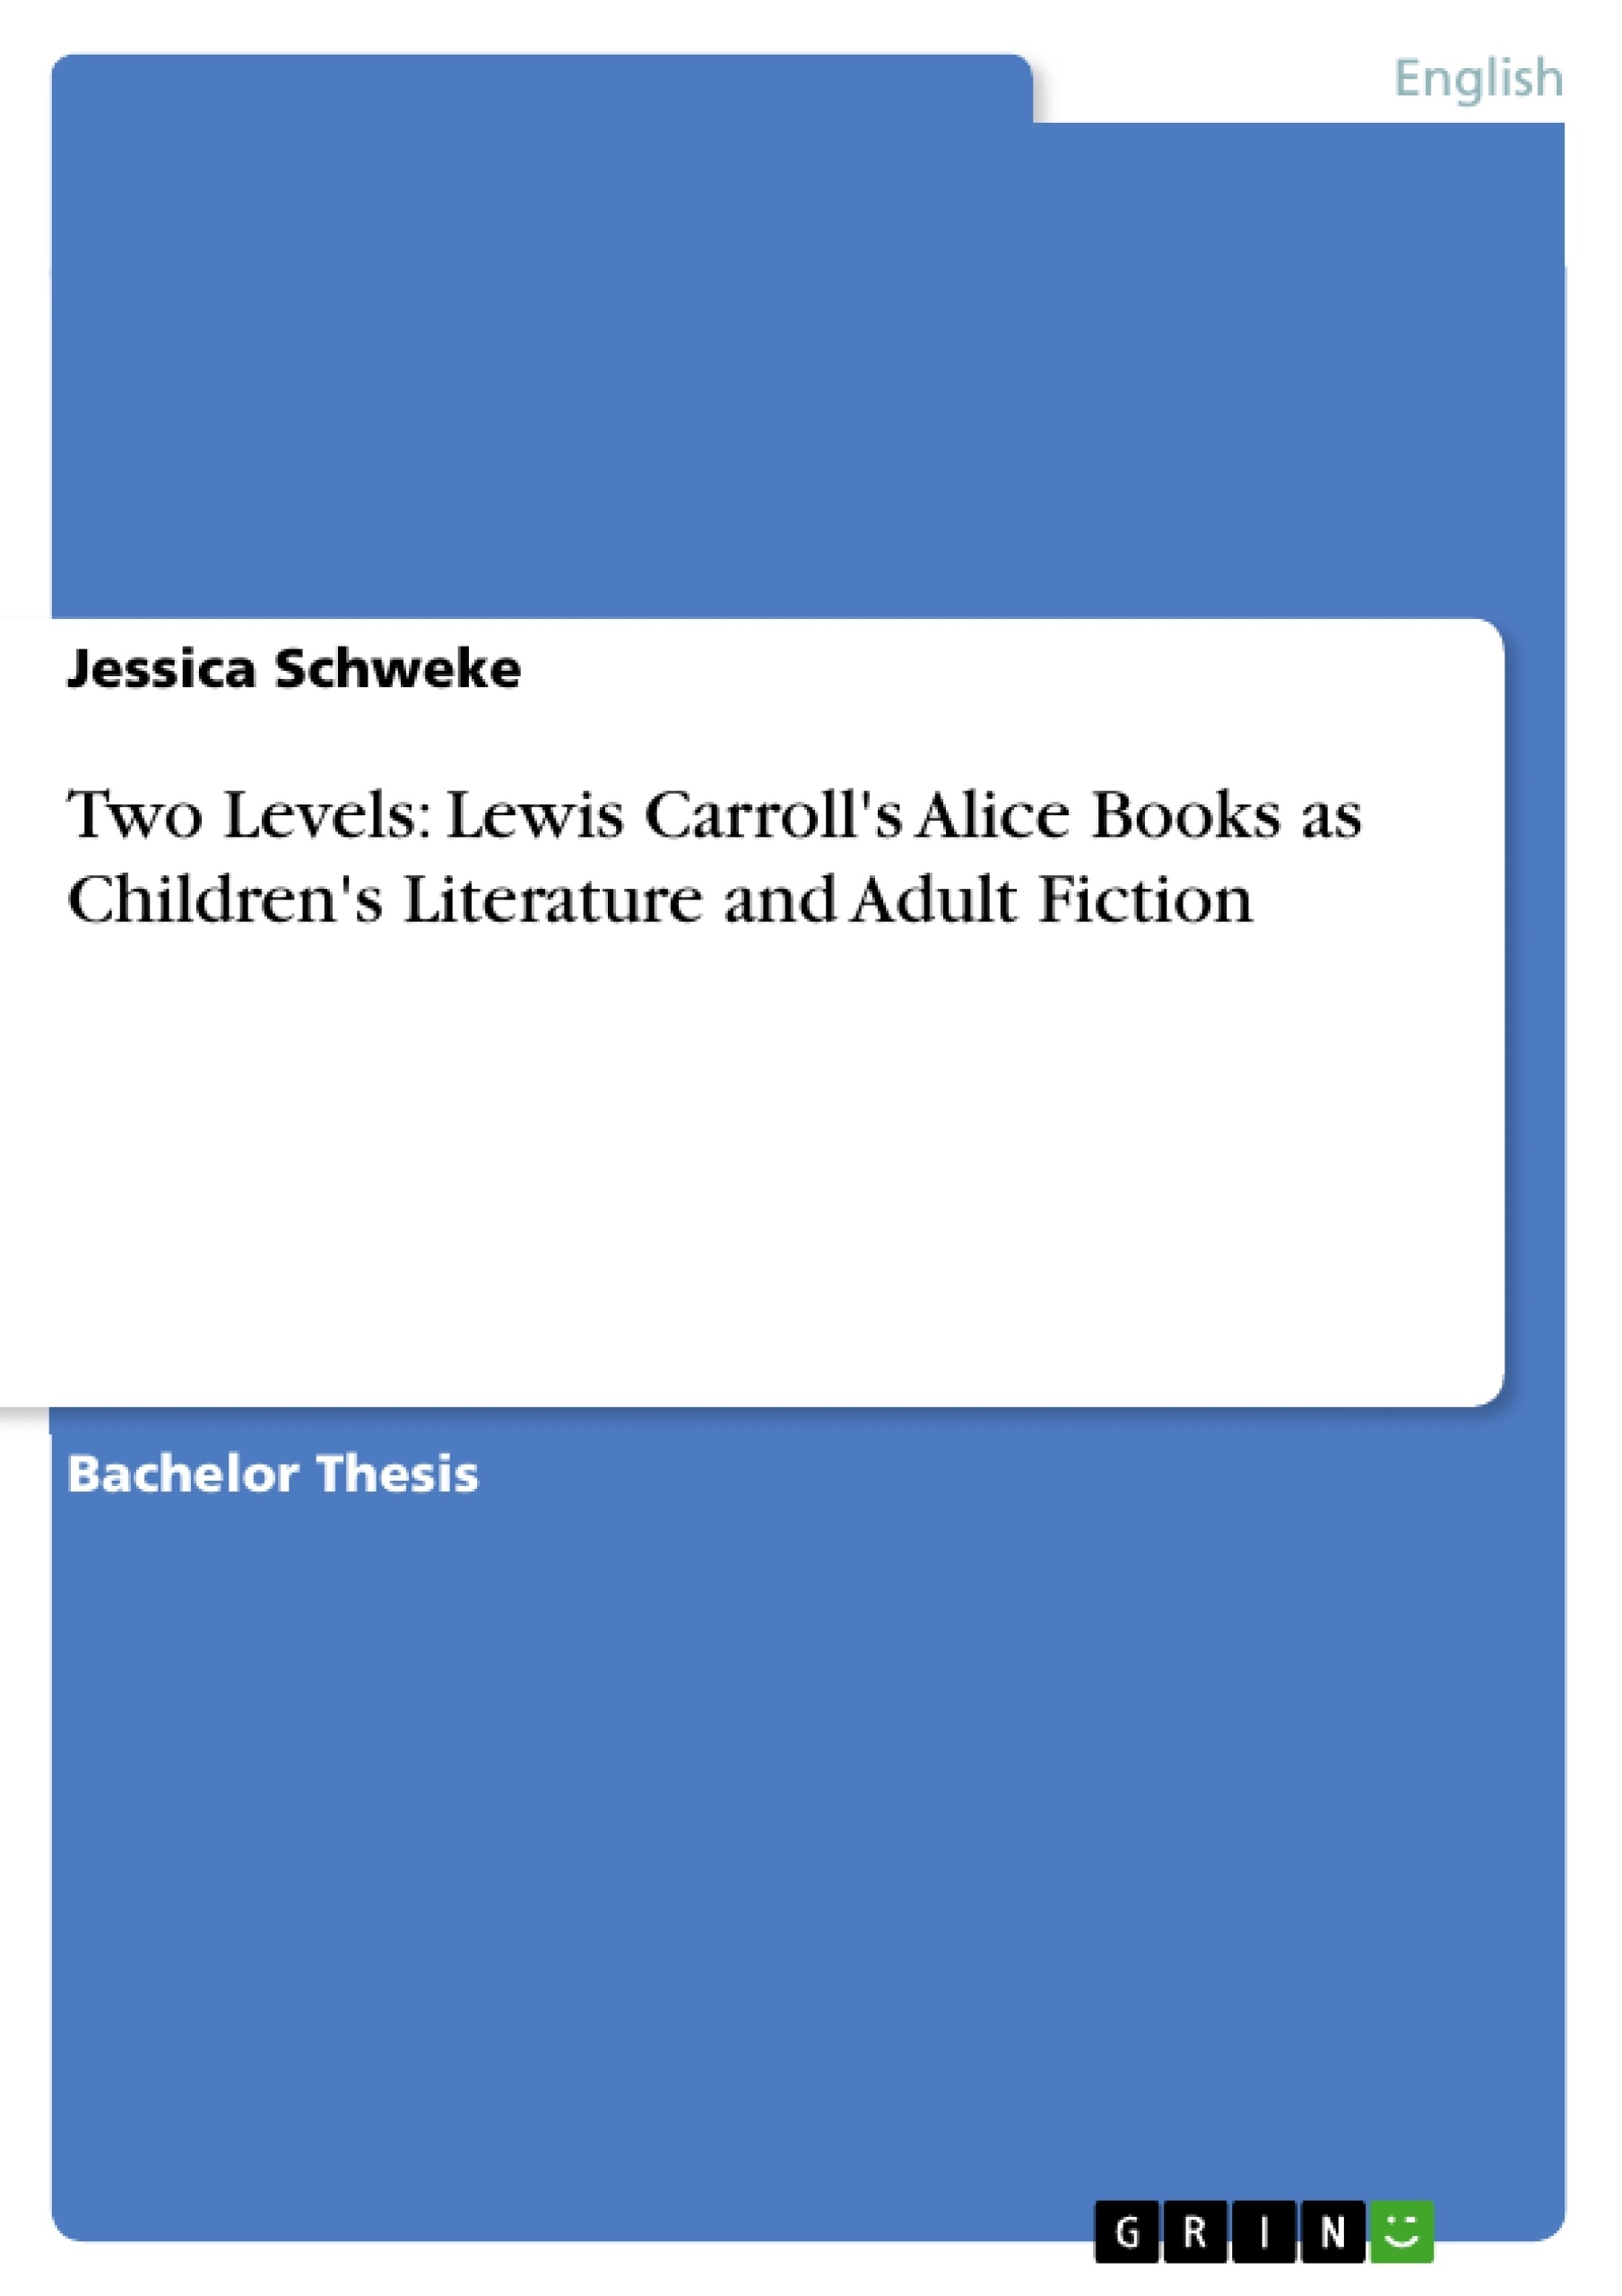 Título: Two Levels: Lewis Carroll's Alice Books as Children's Literature and Adult Fiction